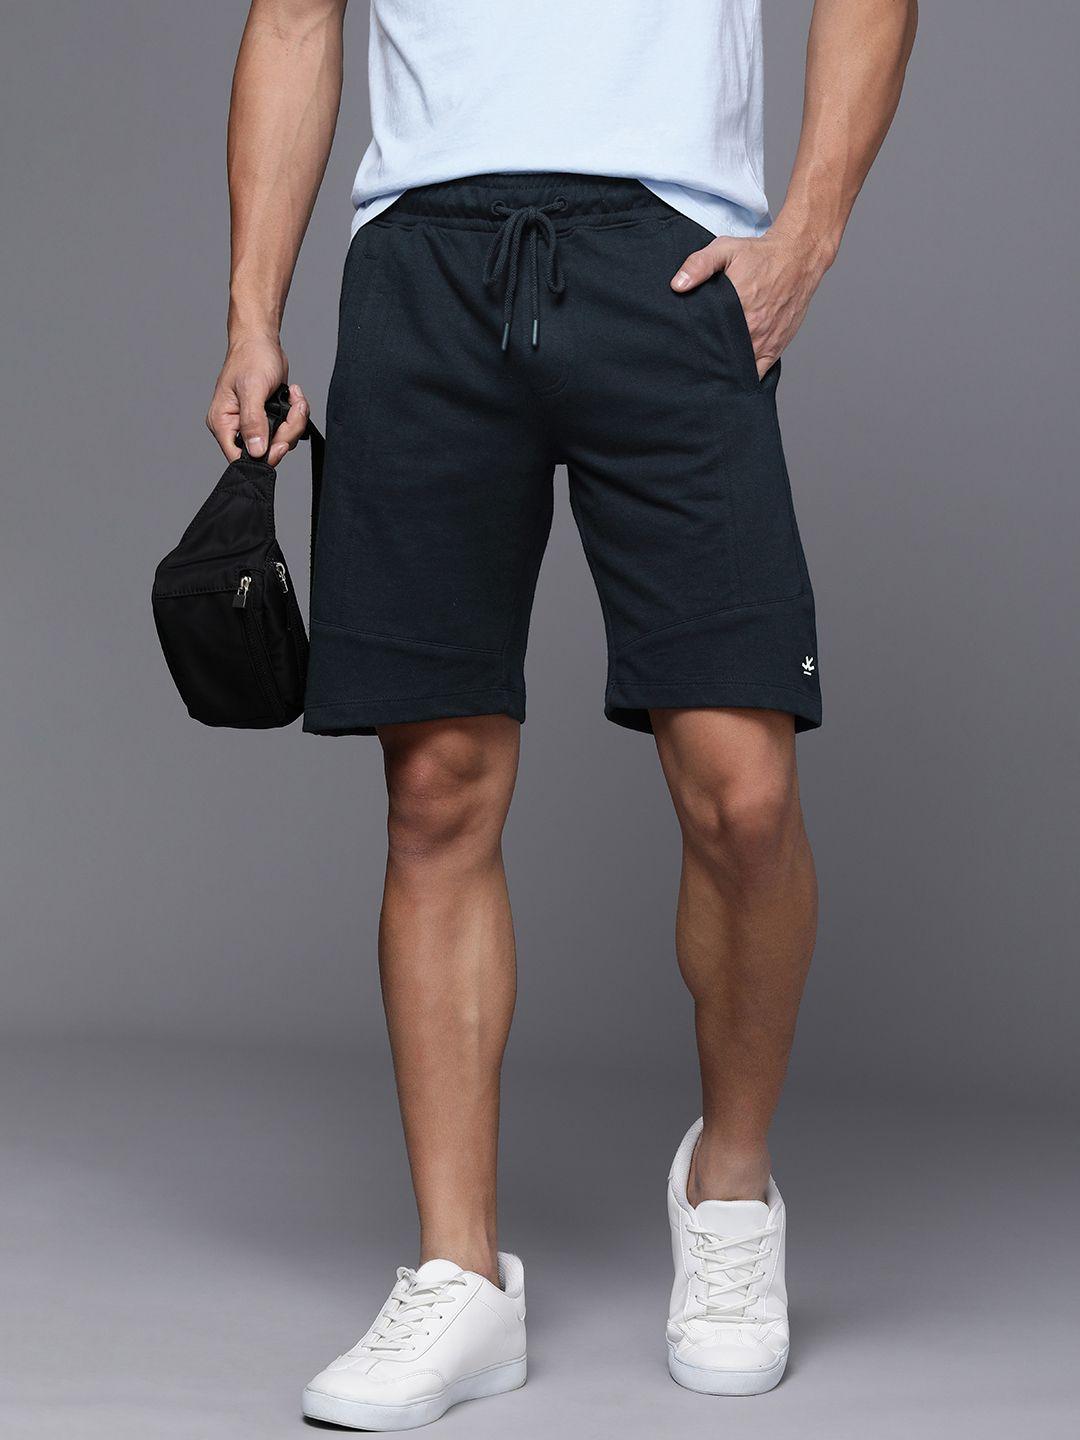 wrogn men mid-rise shorts with drawstring closure